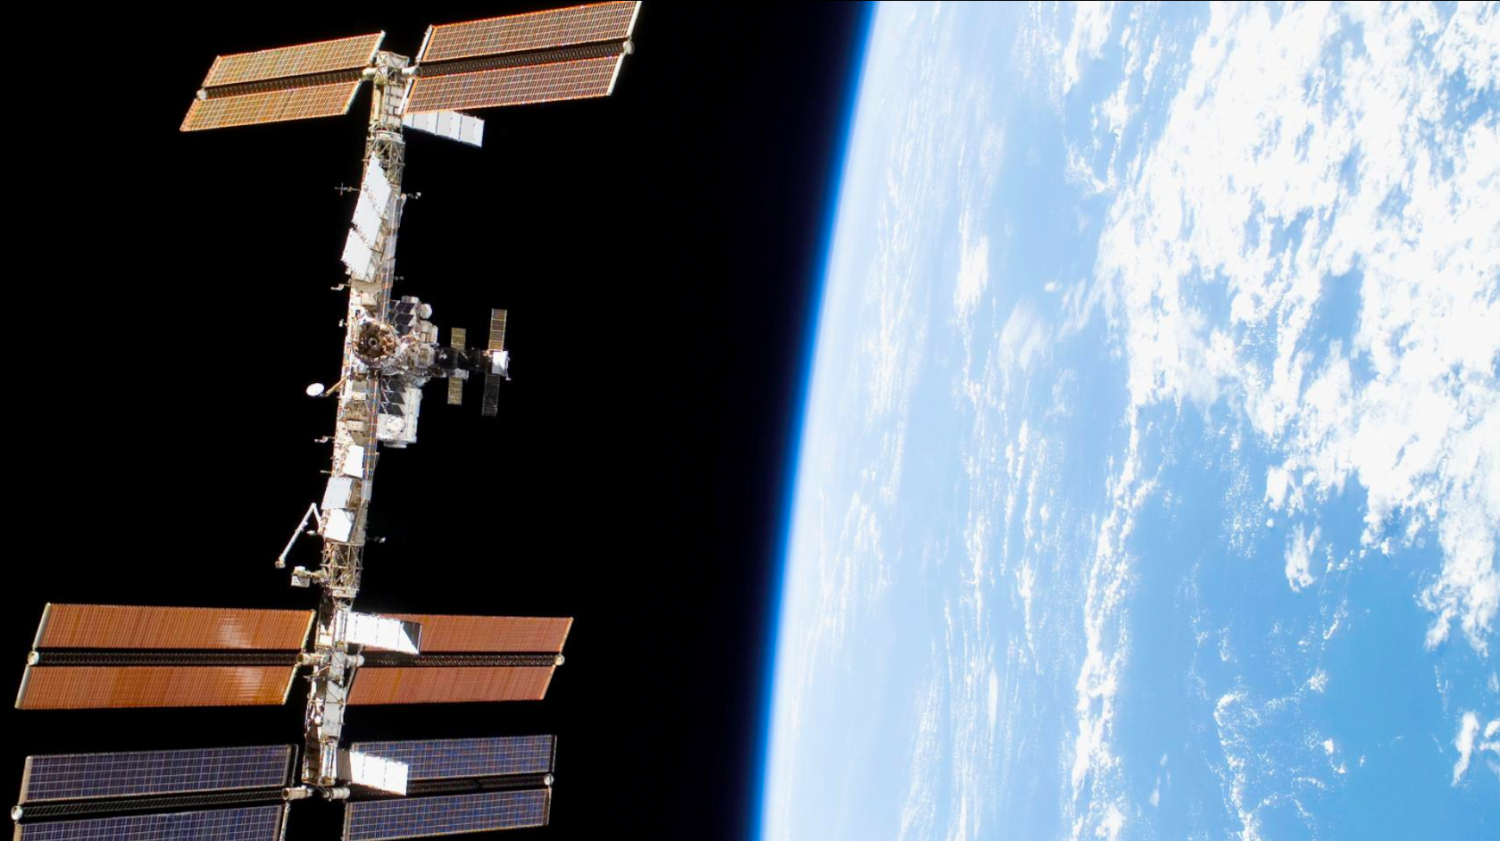 NASA To Allow Private Citizens On Space Station